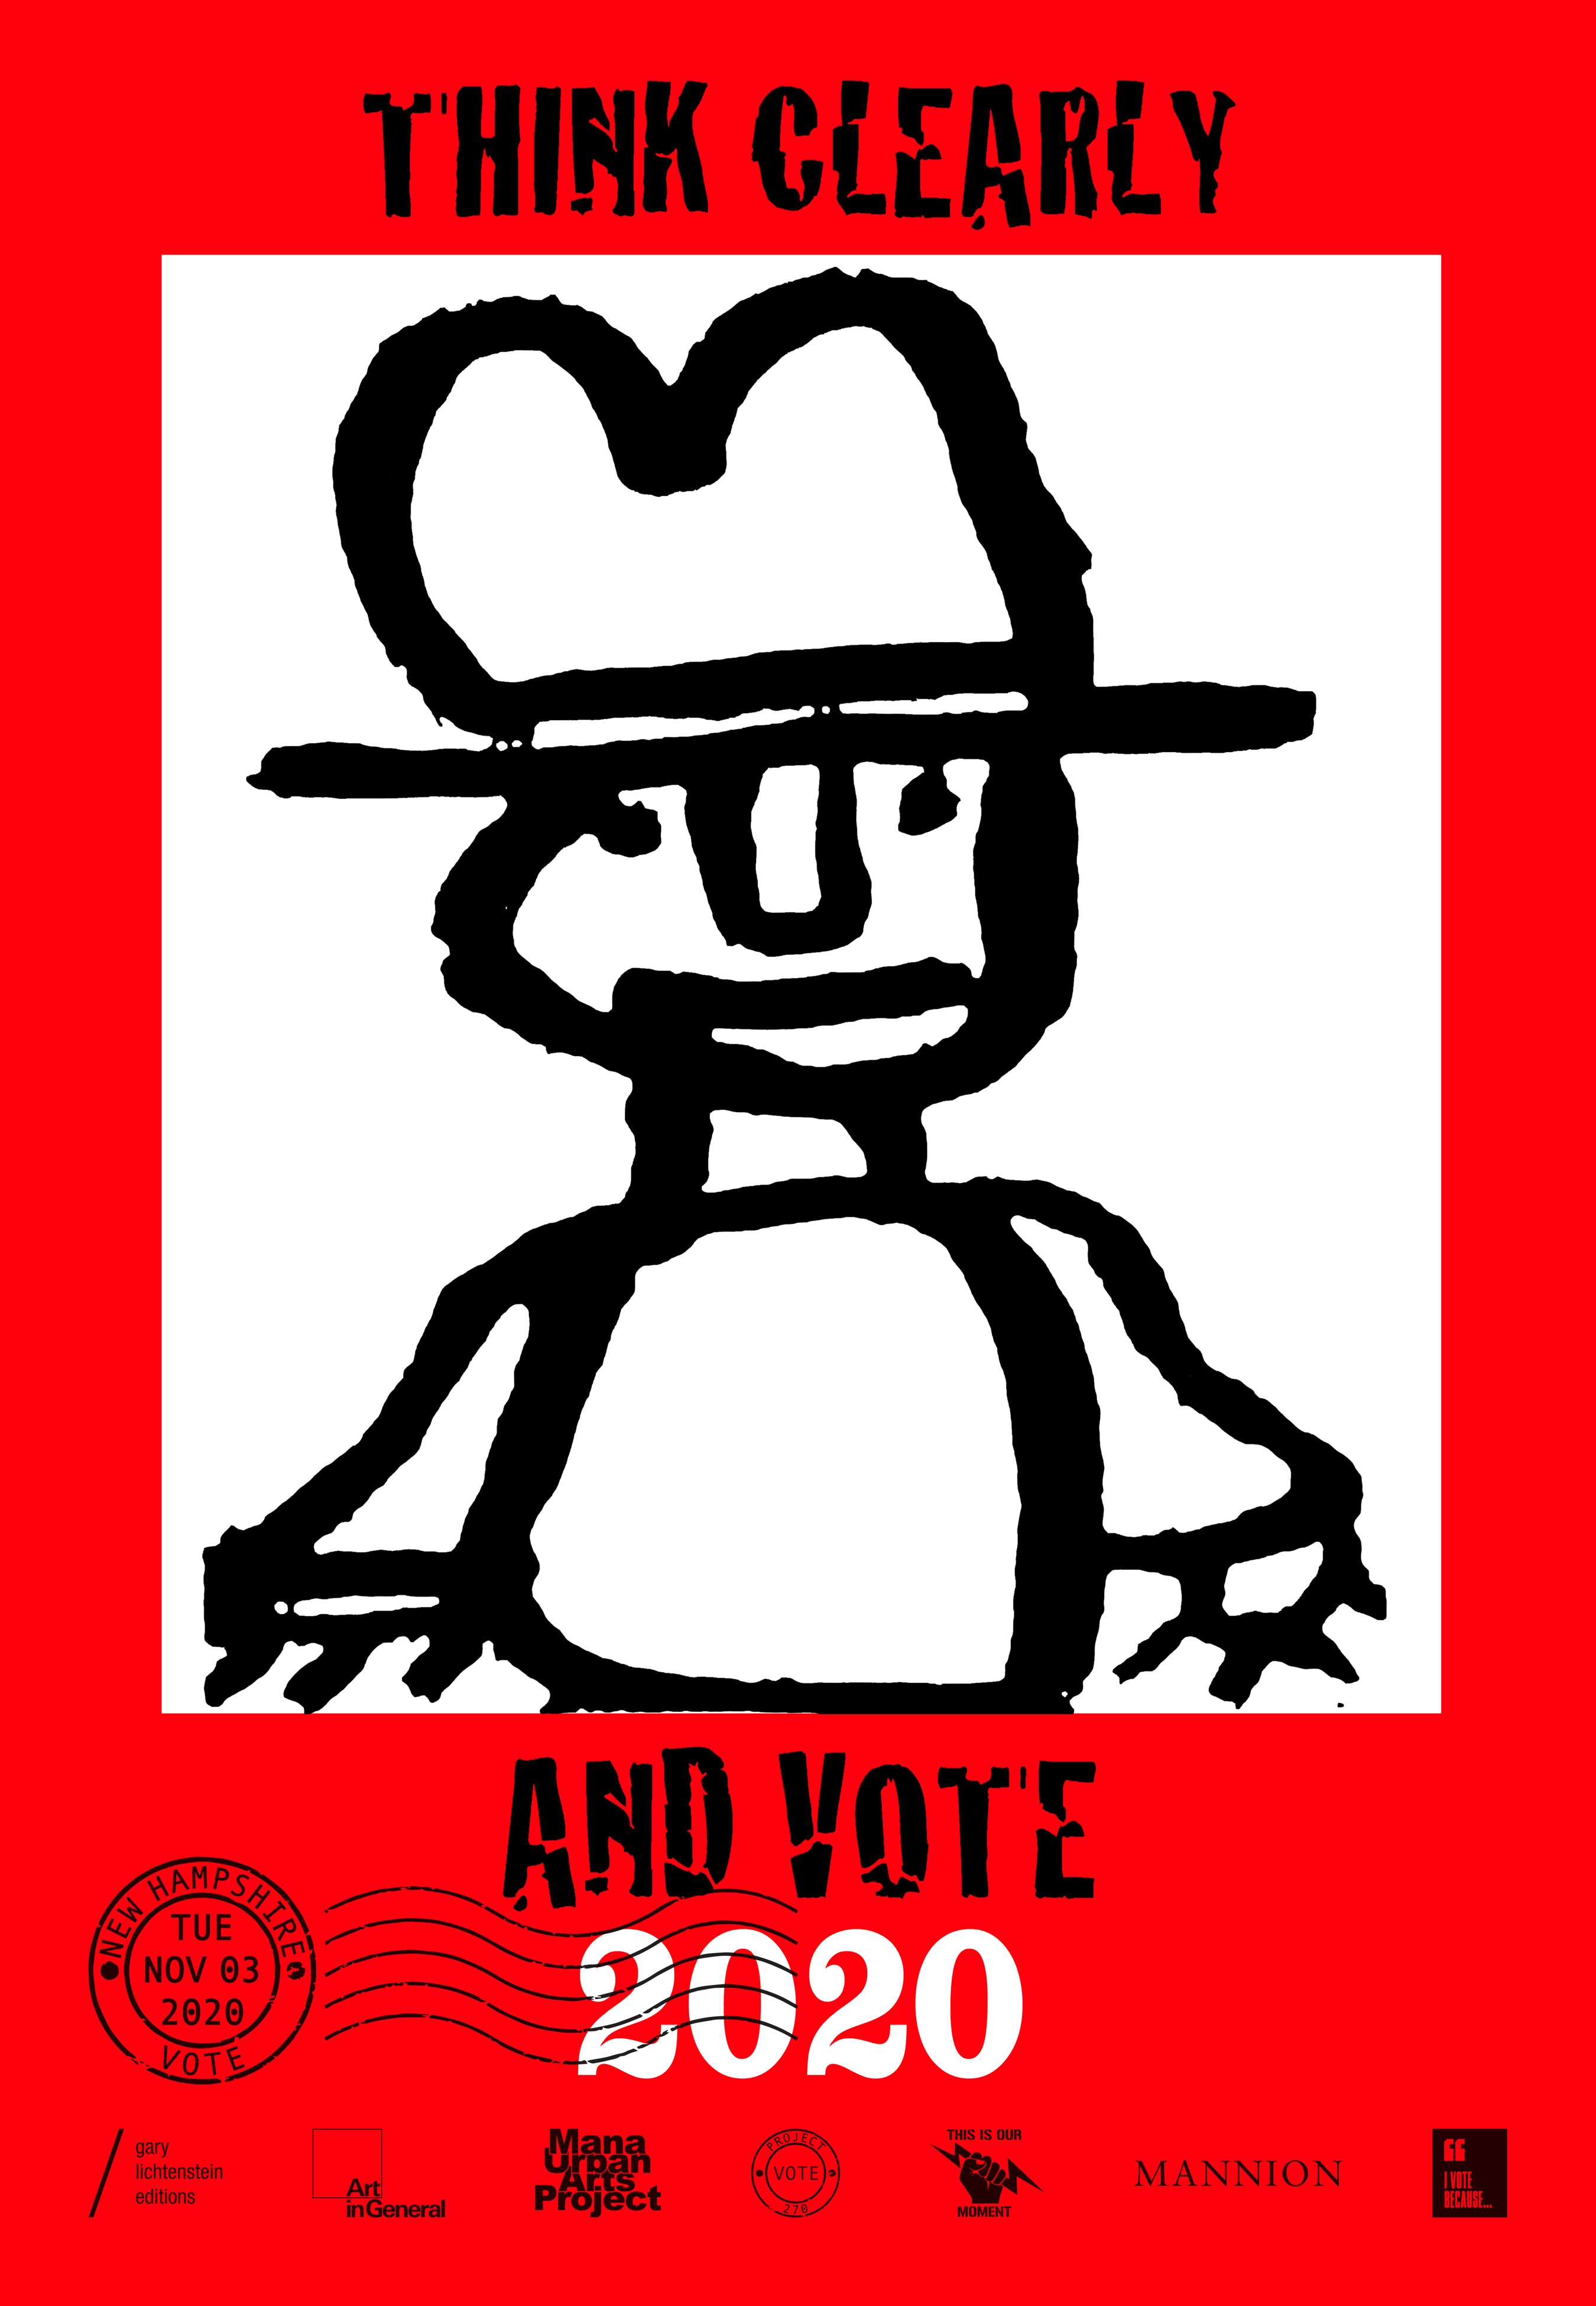 New Hampshire Get Out The Vote Poster by Phil Demise Smith